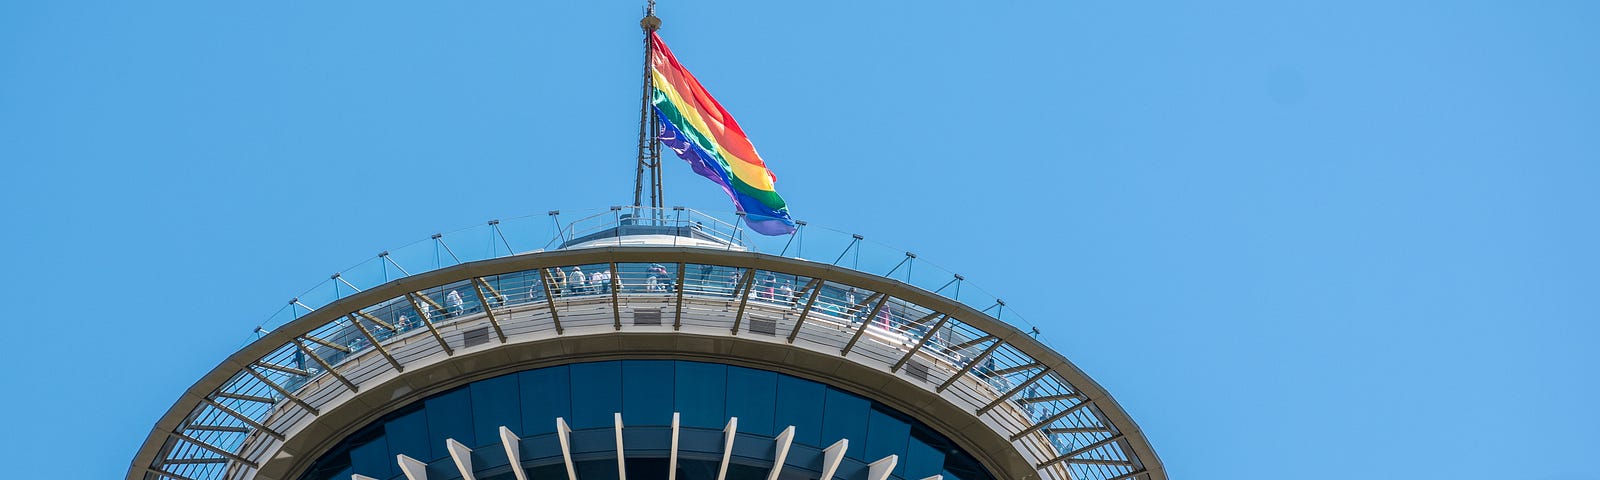 Photo of the top of the Seattle Needle with a pride flag flying on top